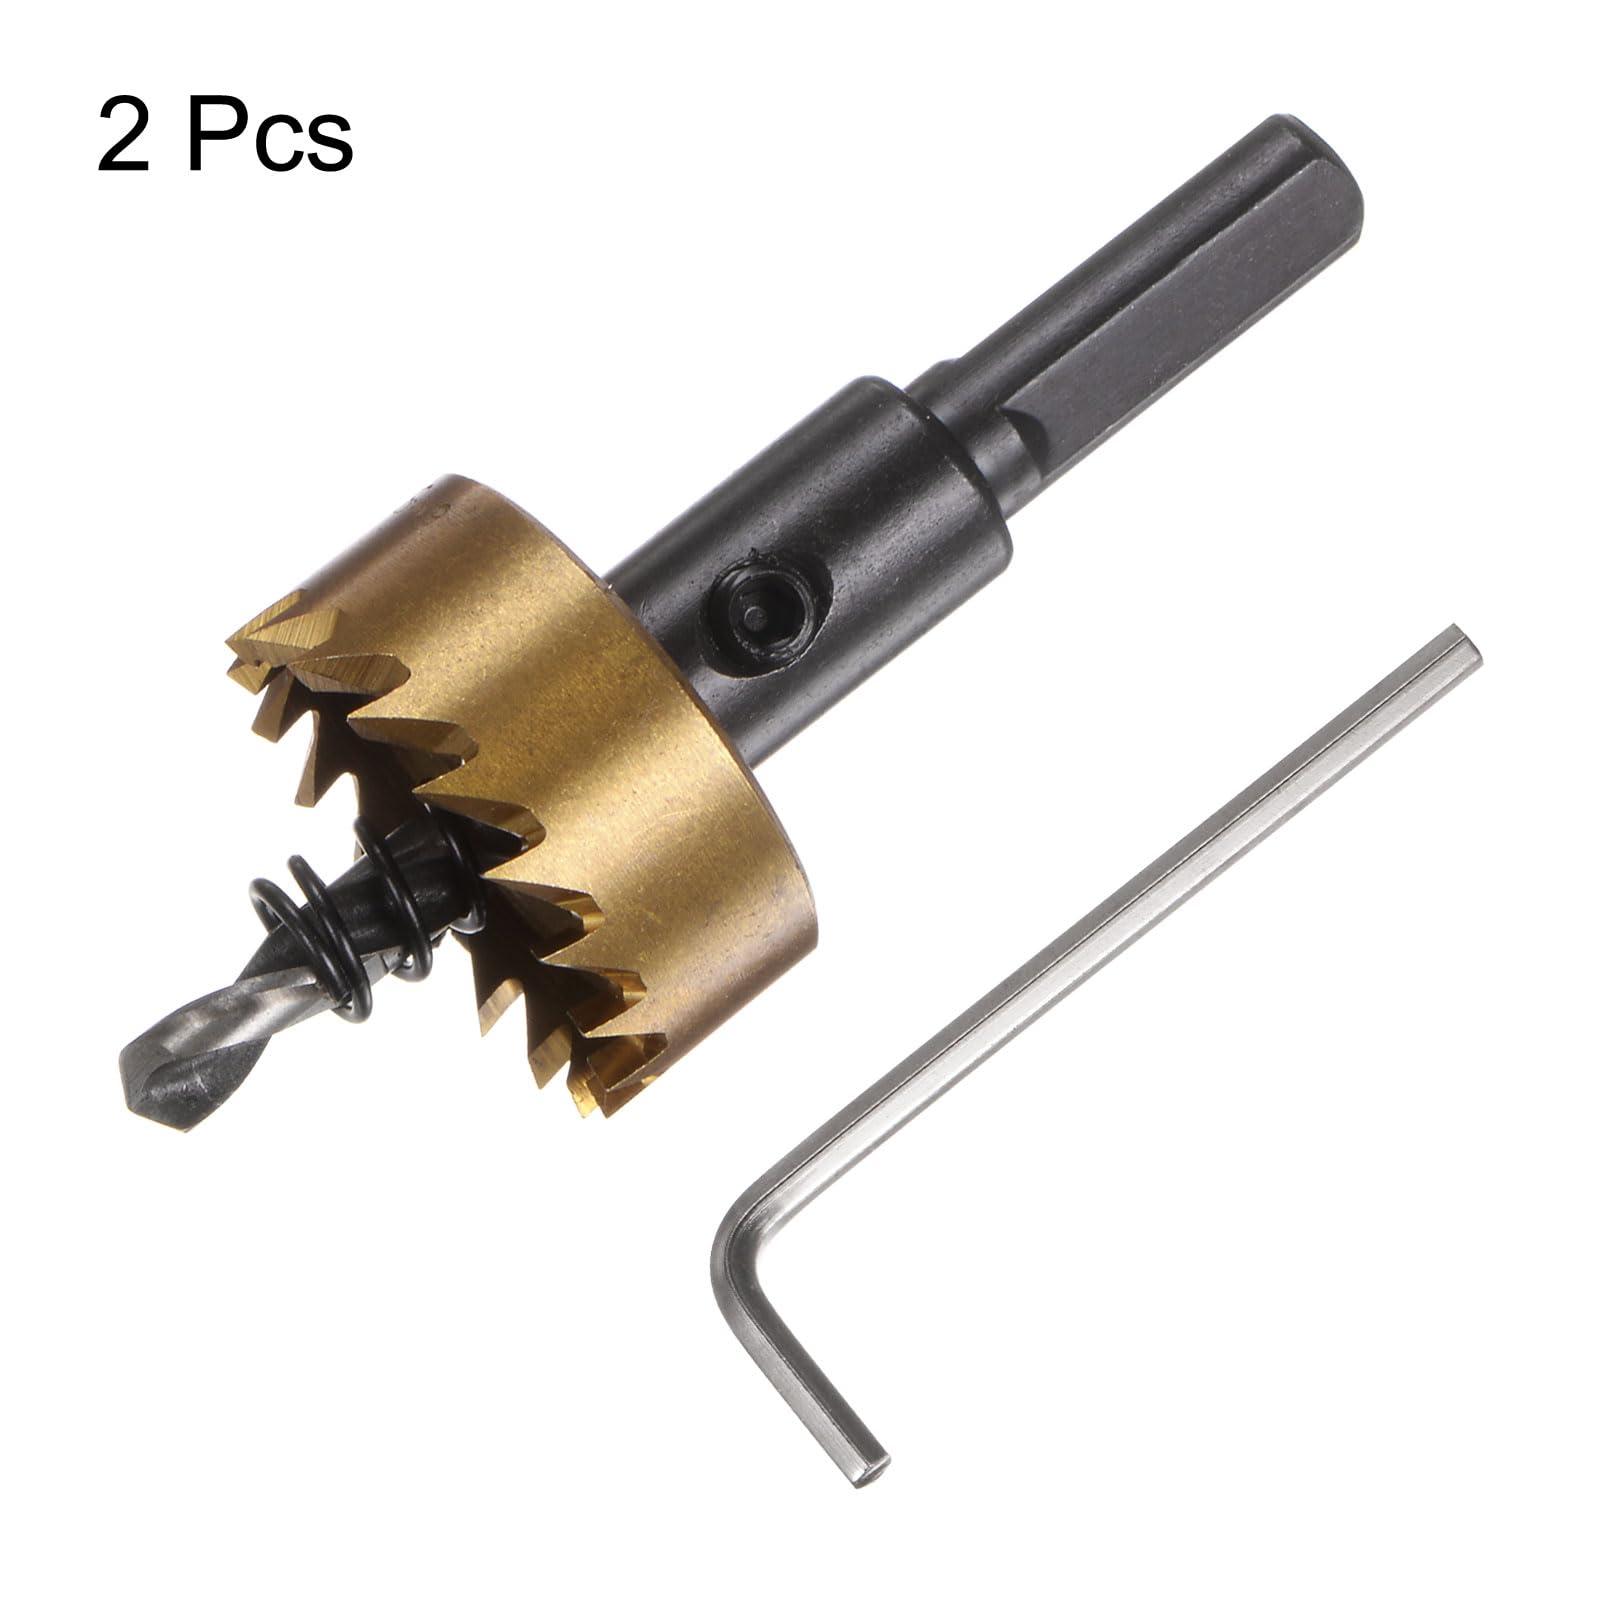 sourcing map 2pcs Hole Saws 28mm (1-1/8") M35 HSS (High Speed Steel) Titanium Coated Drill Bits Cutters Openers for Stainless Steel Aluminum Alloy Metal Wood Plastic 2